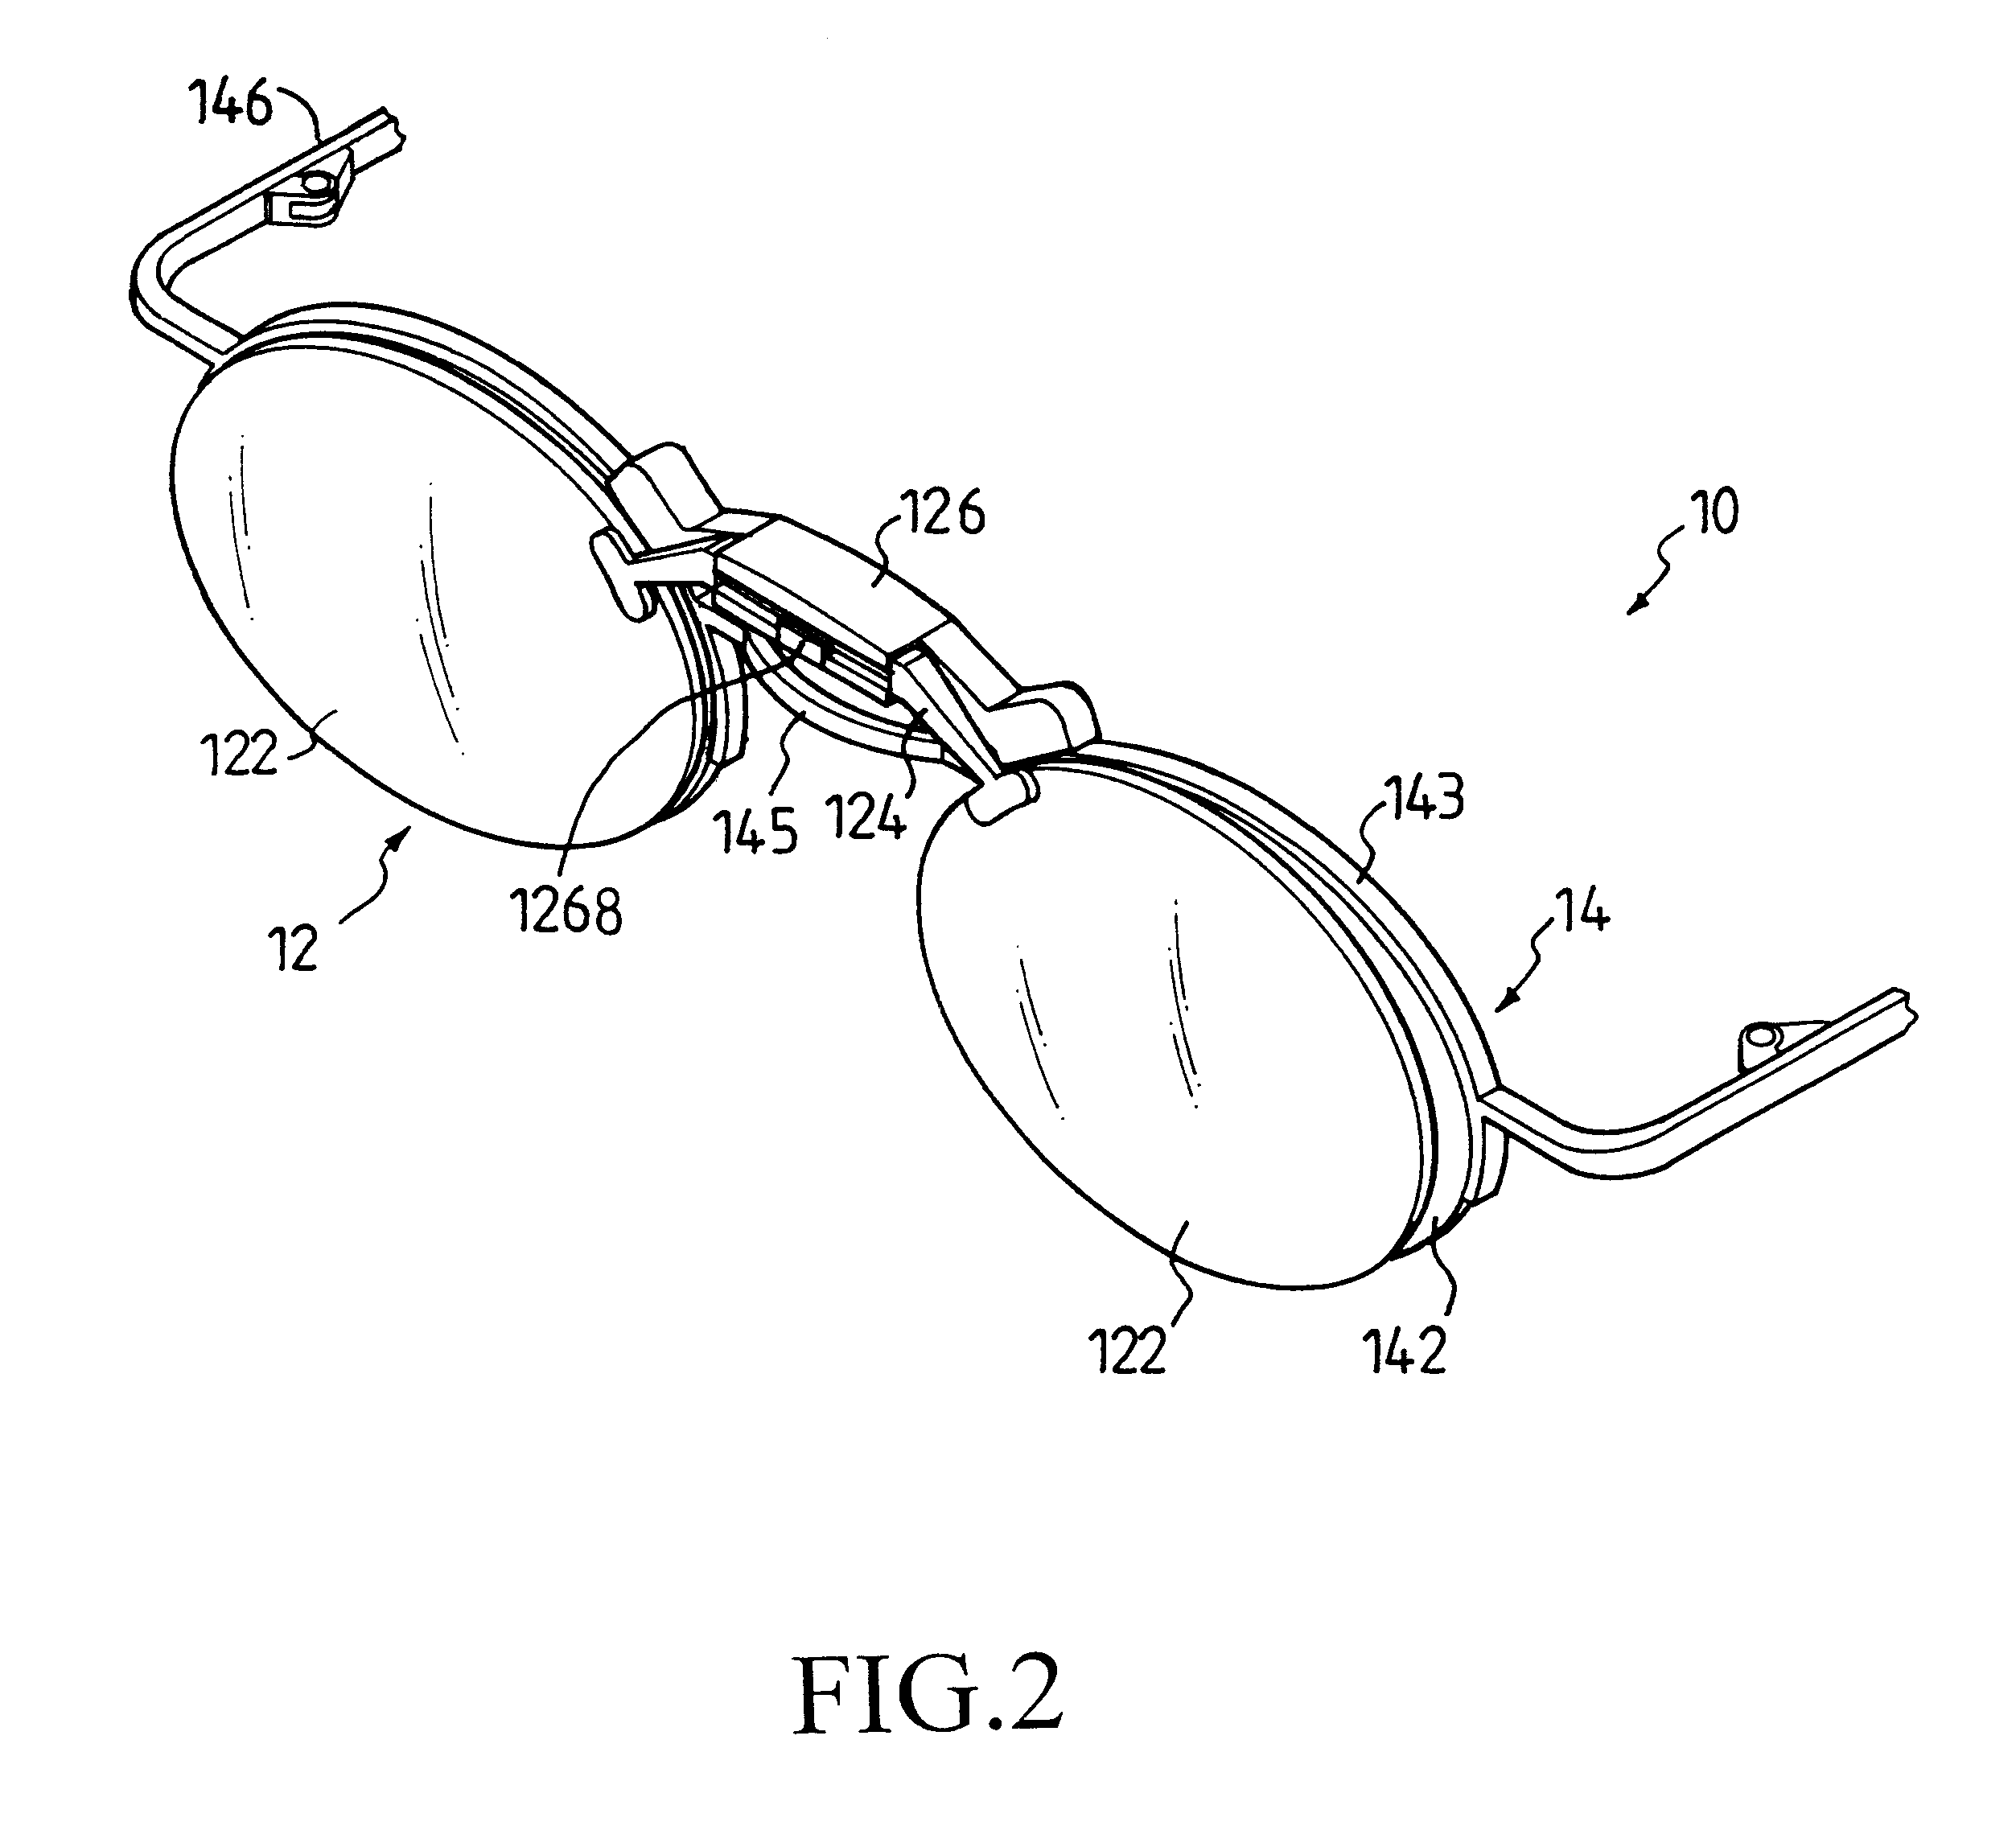 Auxiliary eyewear with laterally distant magnets on lens retaining mechanisms